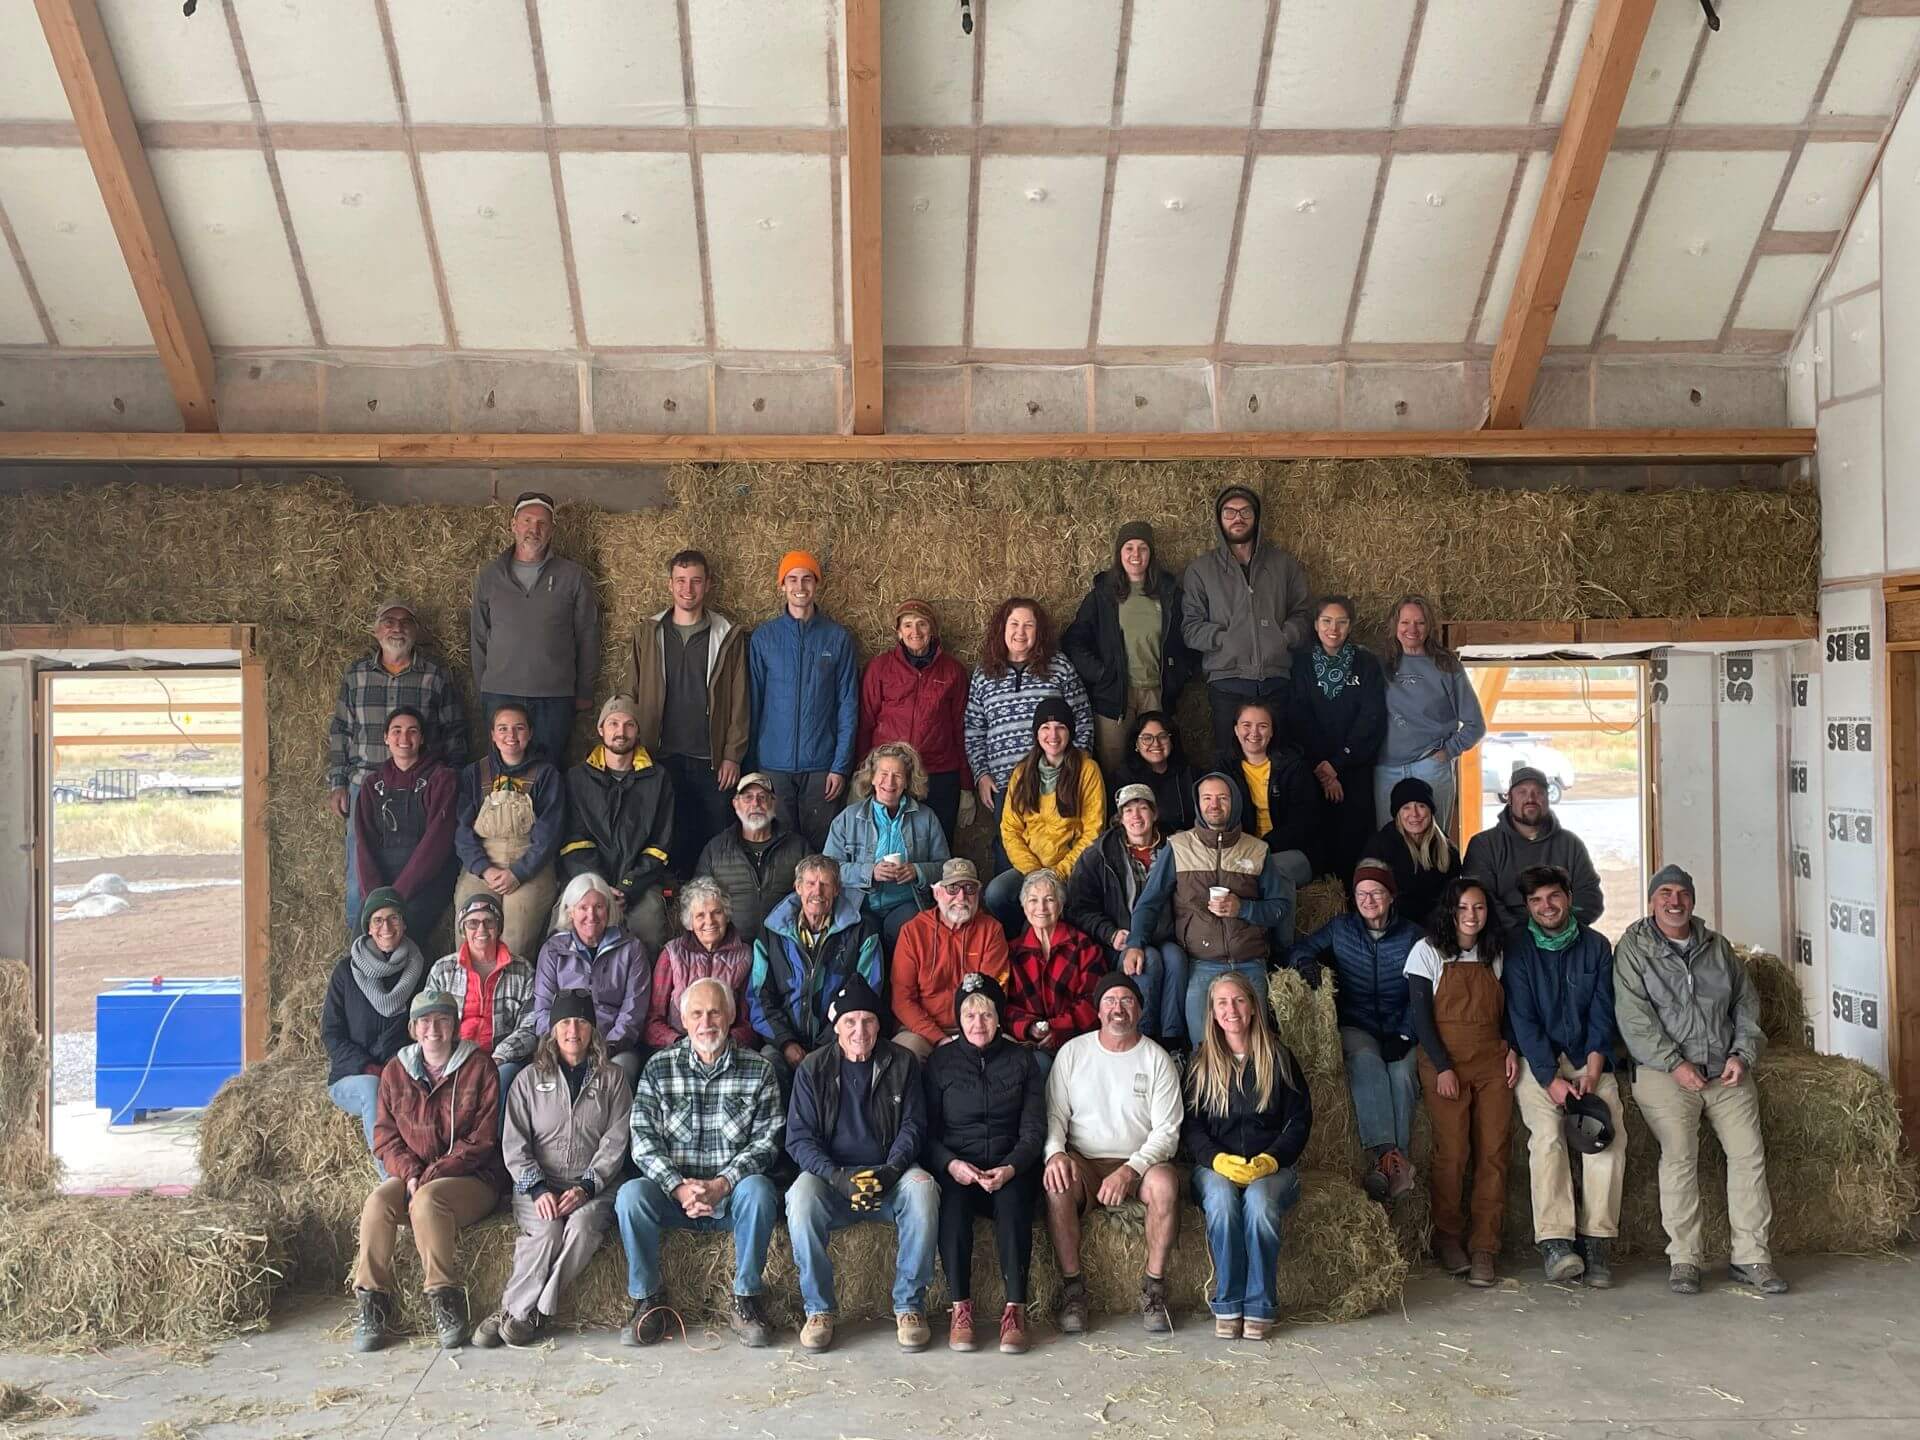 A large crew turned out to help insulate the new Nature Center with straw bales